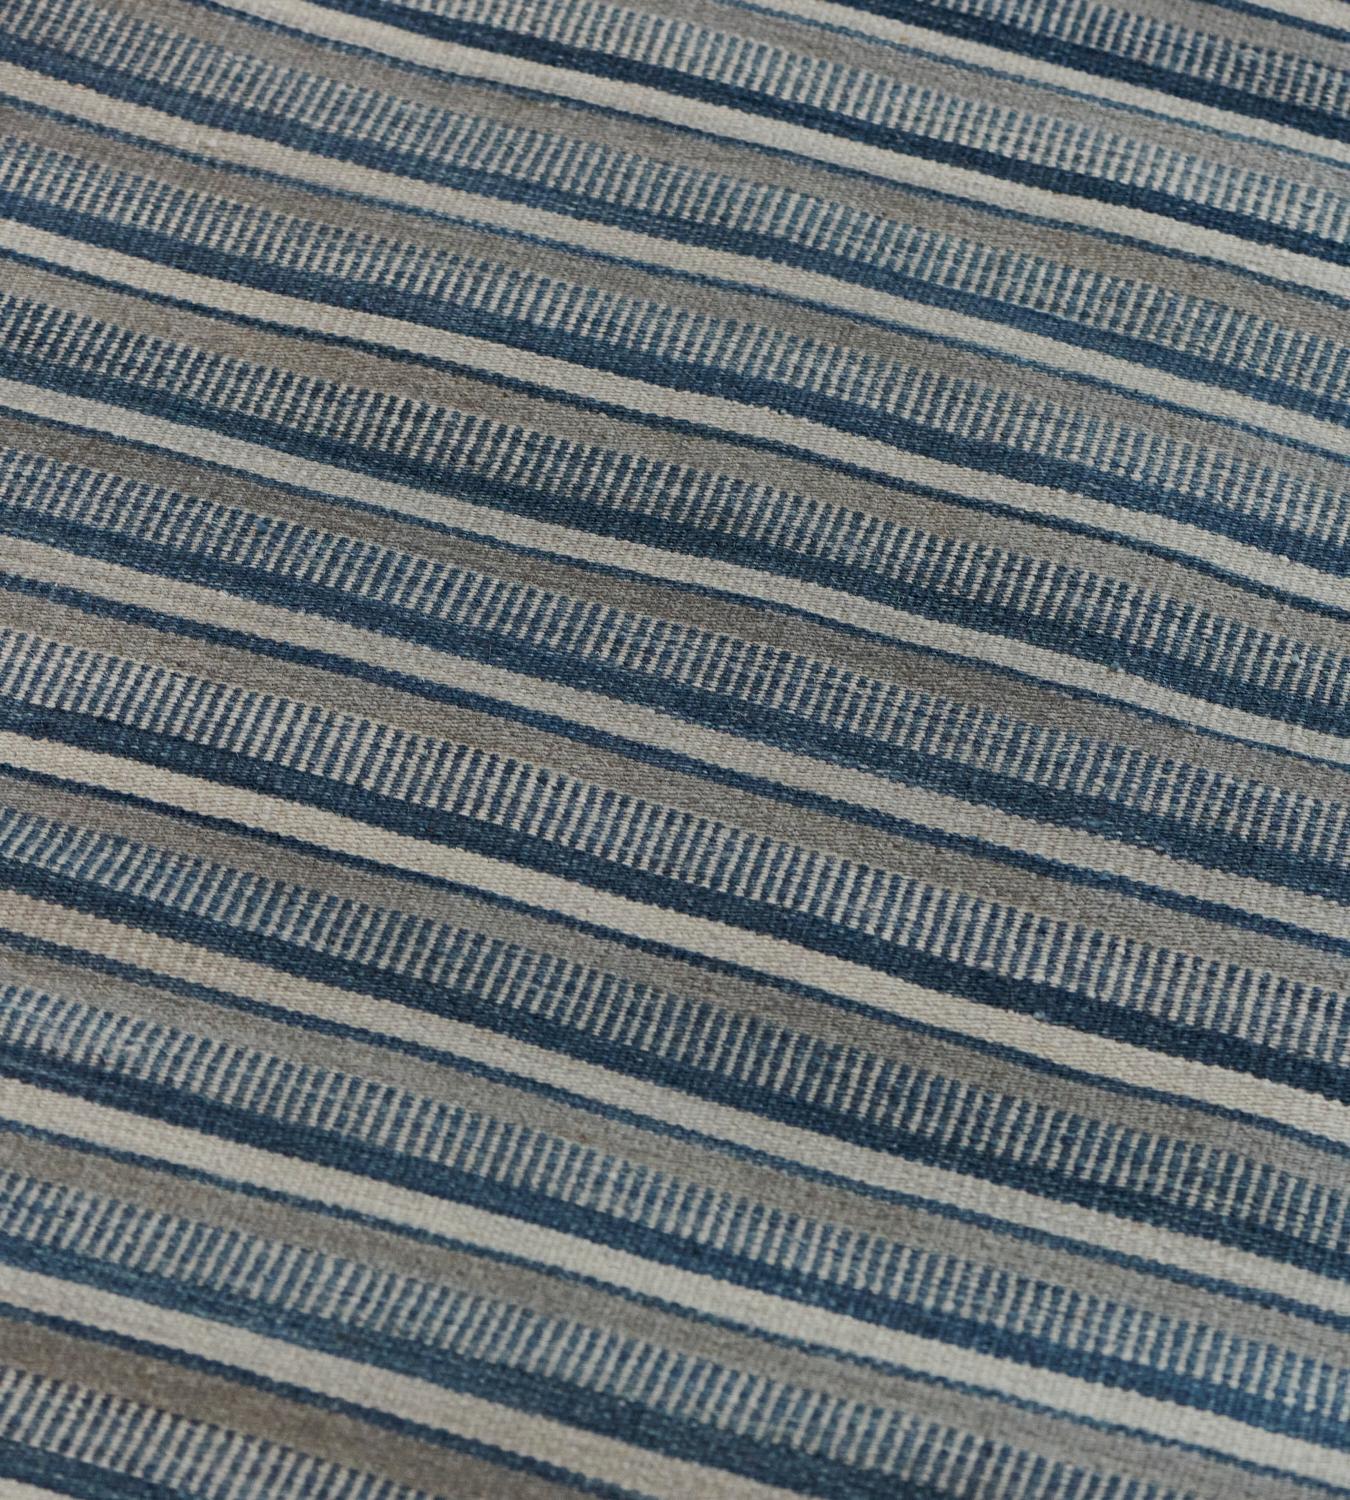 Part of the Mansour Modern collection, this flat-weave blue striped rug is handwoven by master weavers using the finest quality techniques and materials.